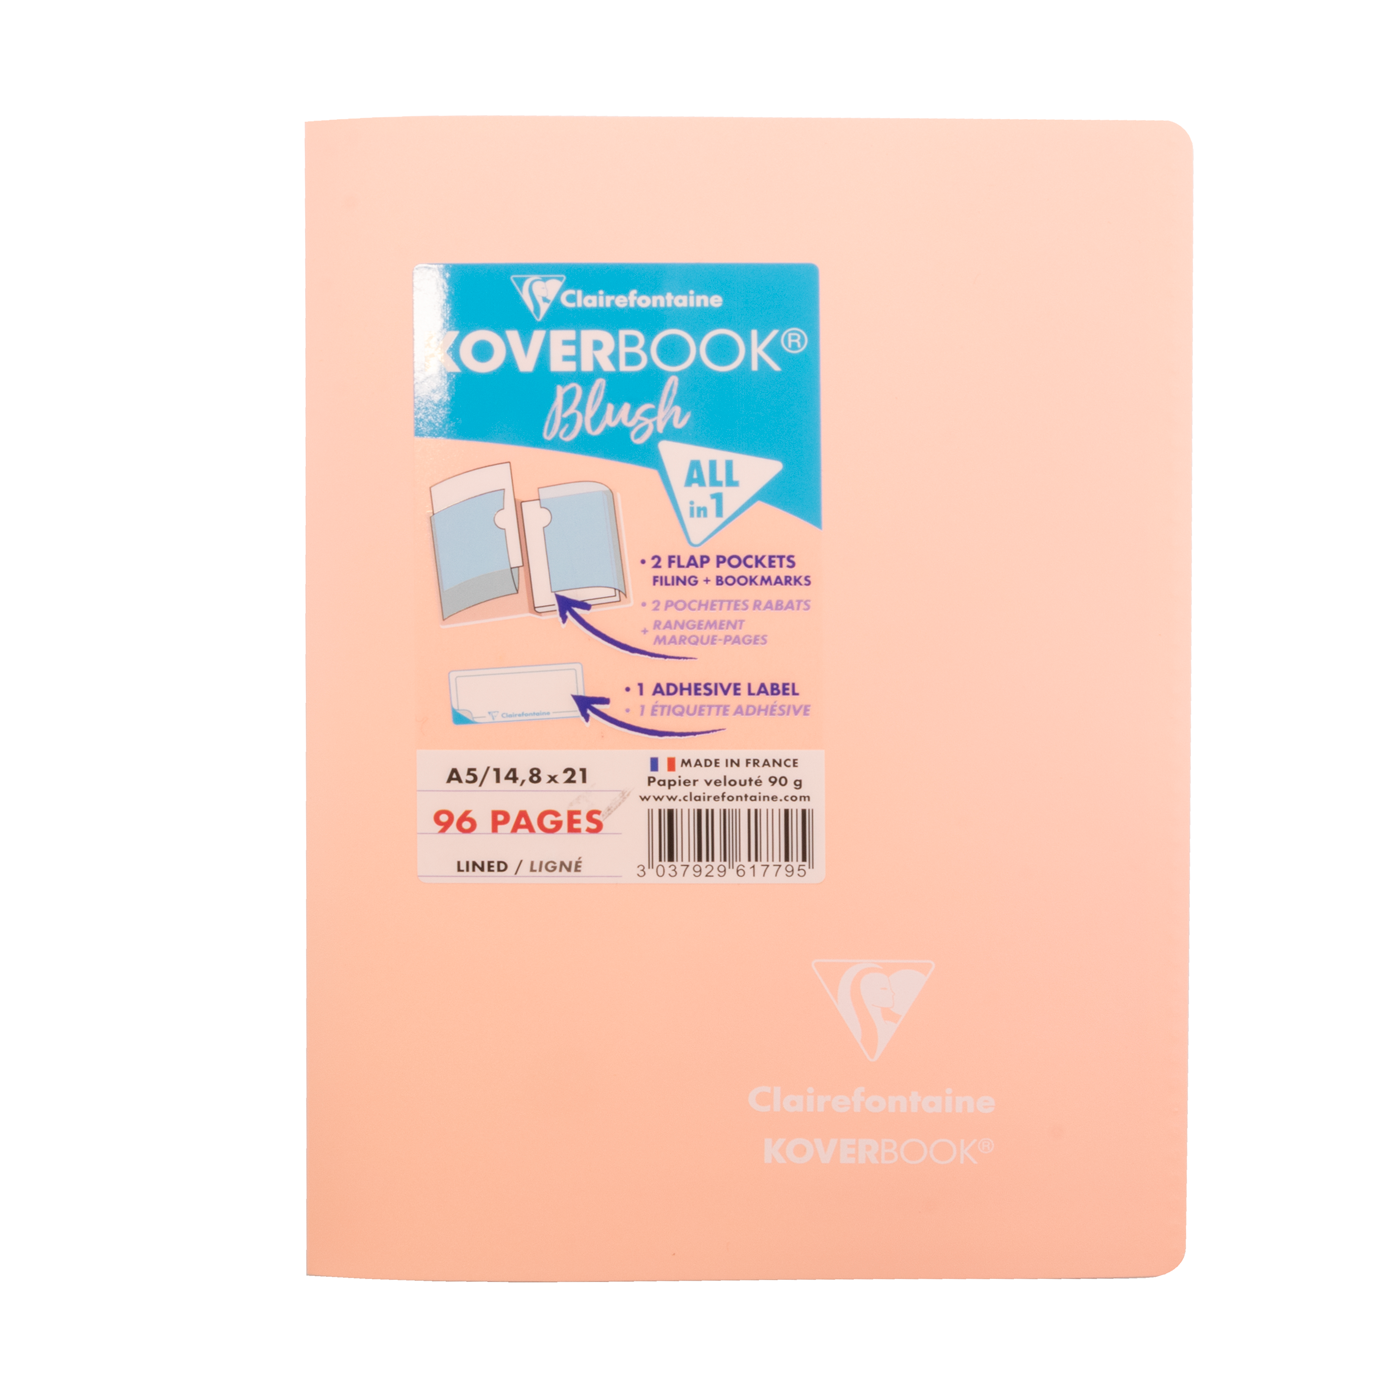 Clairefontaine Koverbook Blush- Staplebound Notebook (48 Sheets) - A5 - Corail